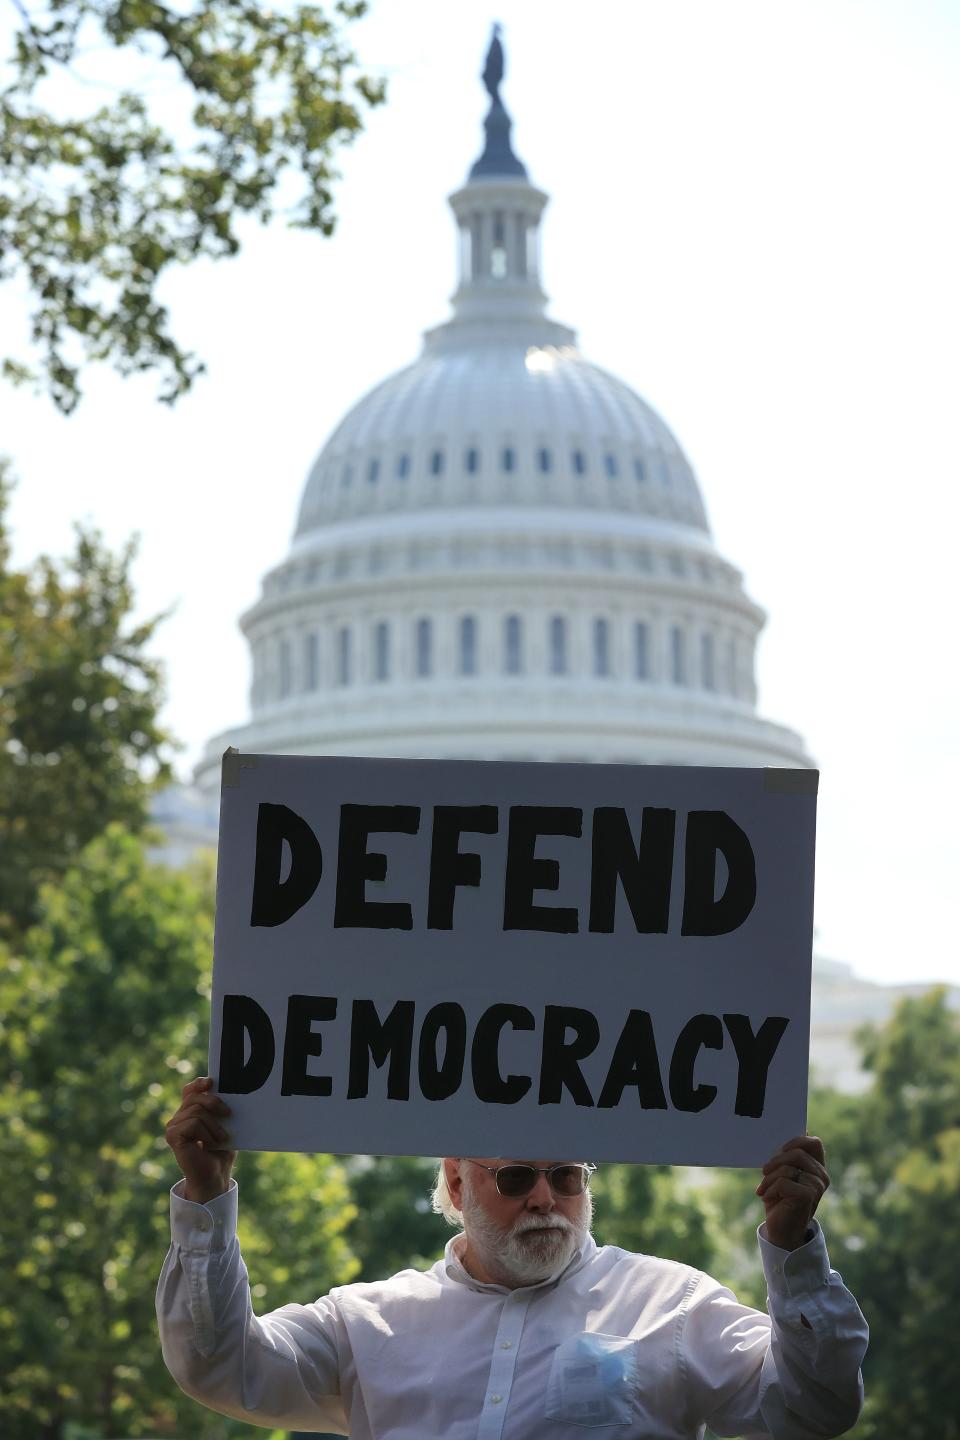 A voting rights activist demonstrates near the U.S. Capitol on Sept. 14.